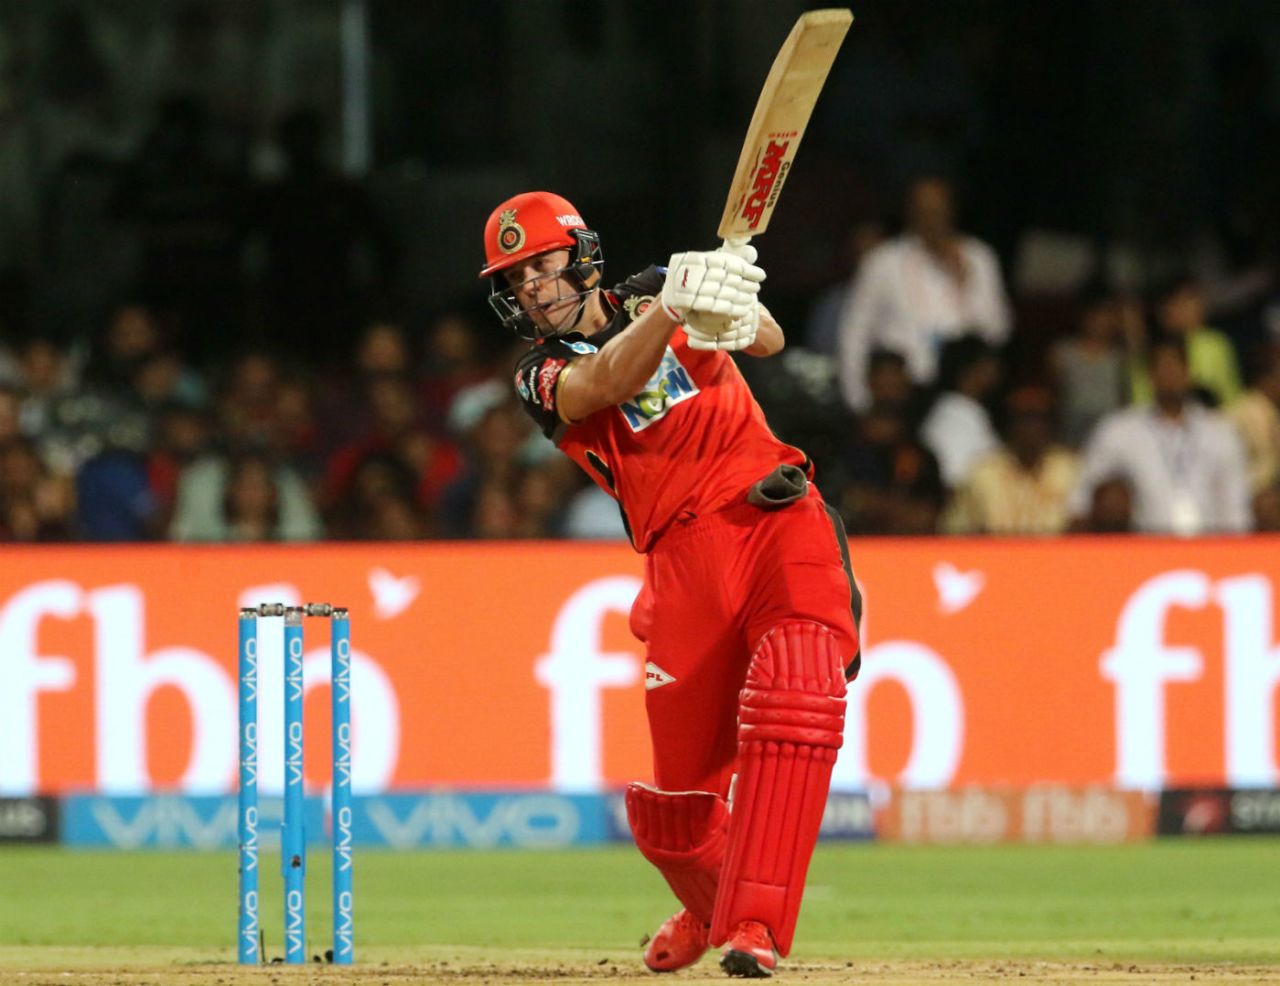 AB de Villiers had the crowd going 'oooh' and 'aaah' right from the time he walked out, Royal Challengers Bangalore v Sunrisers Hyderabad, IPL, Bengaluru, May 17, 2018